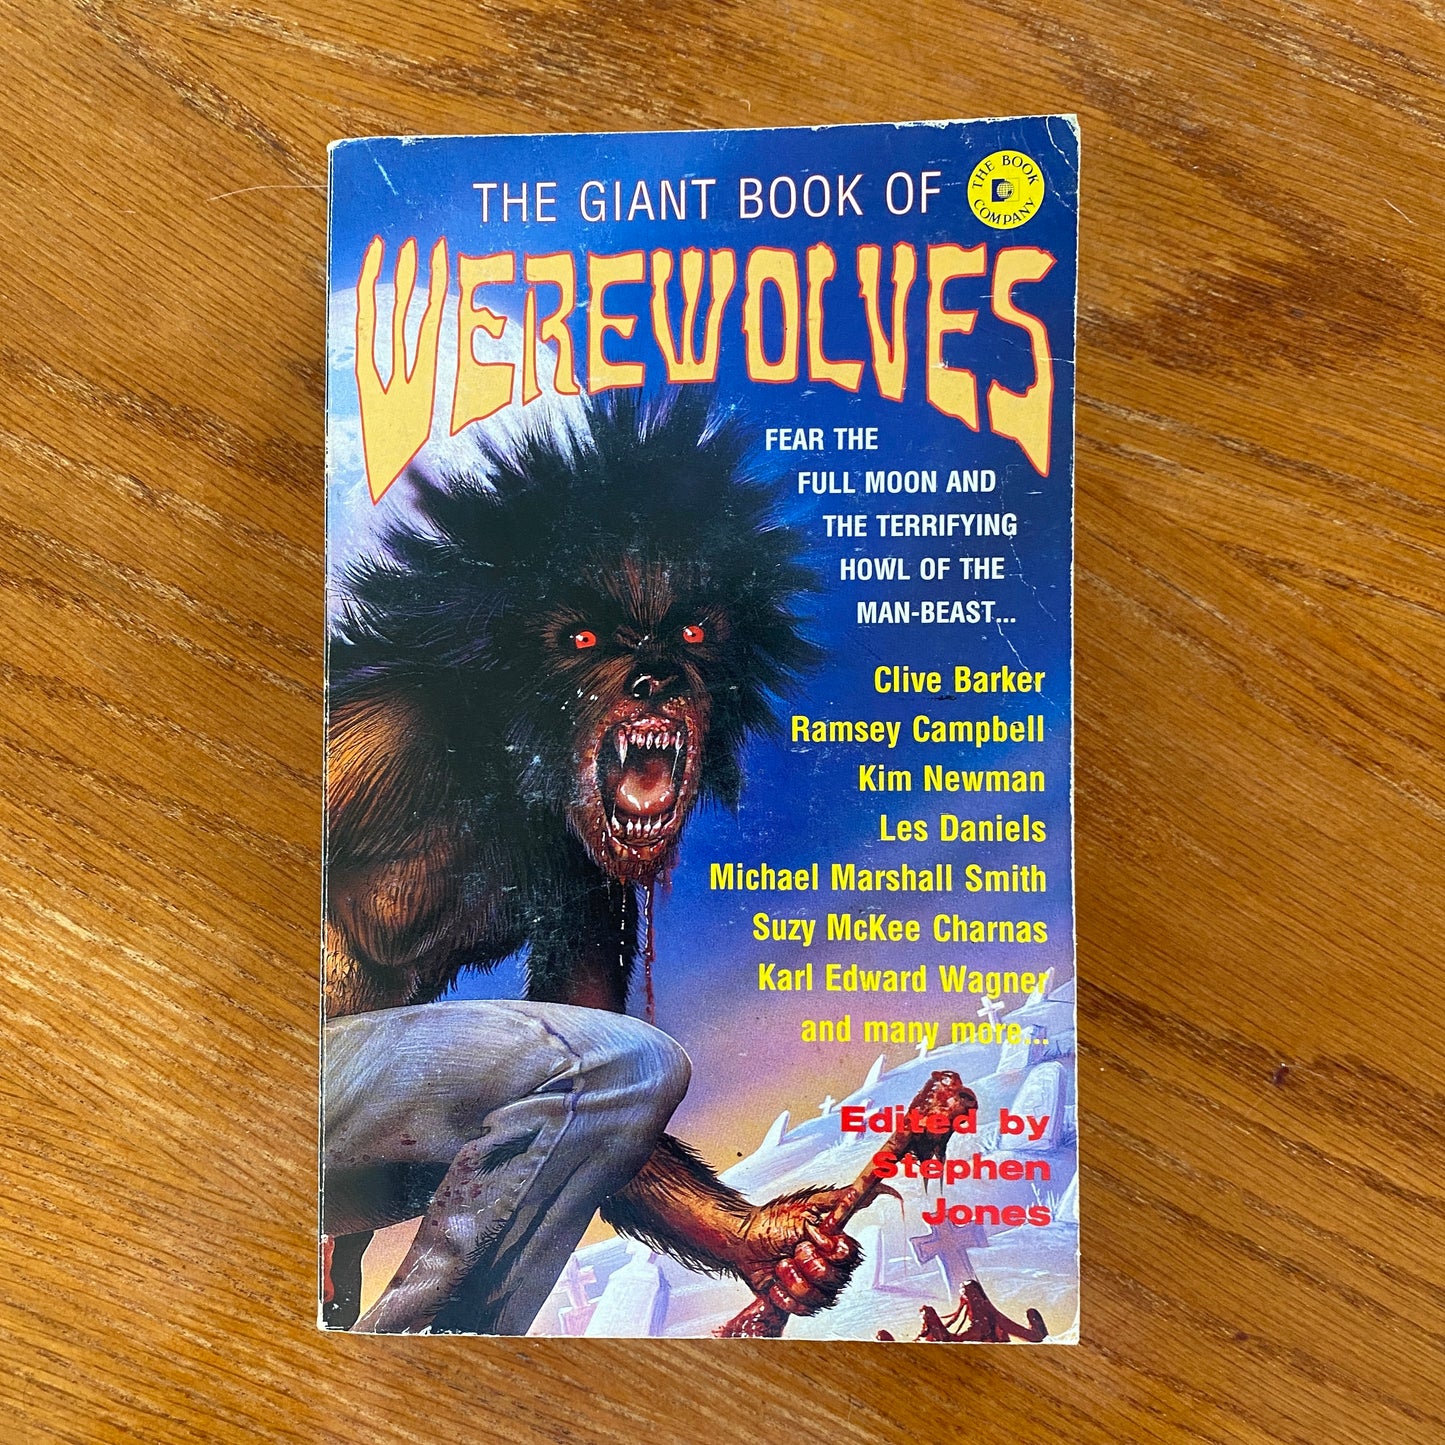 The Giant Book Of Werewolves - Clive Barker & More